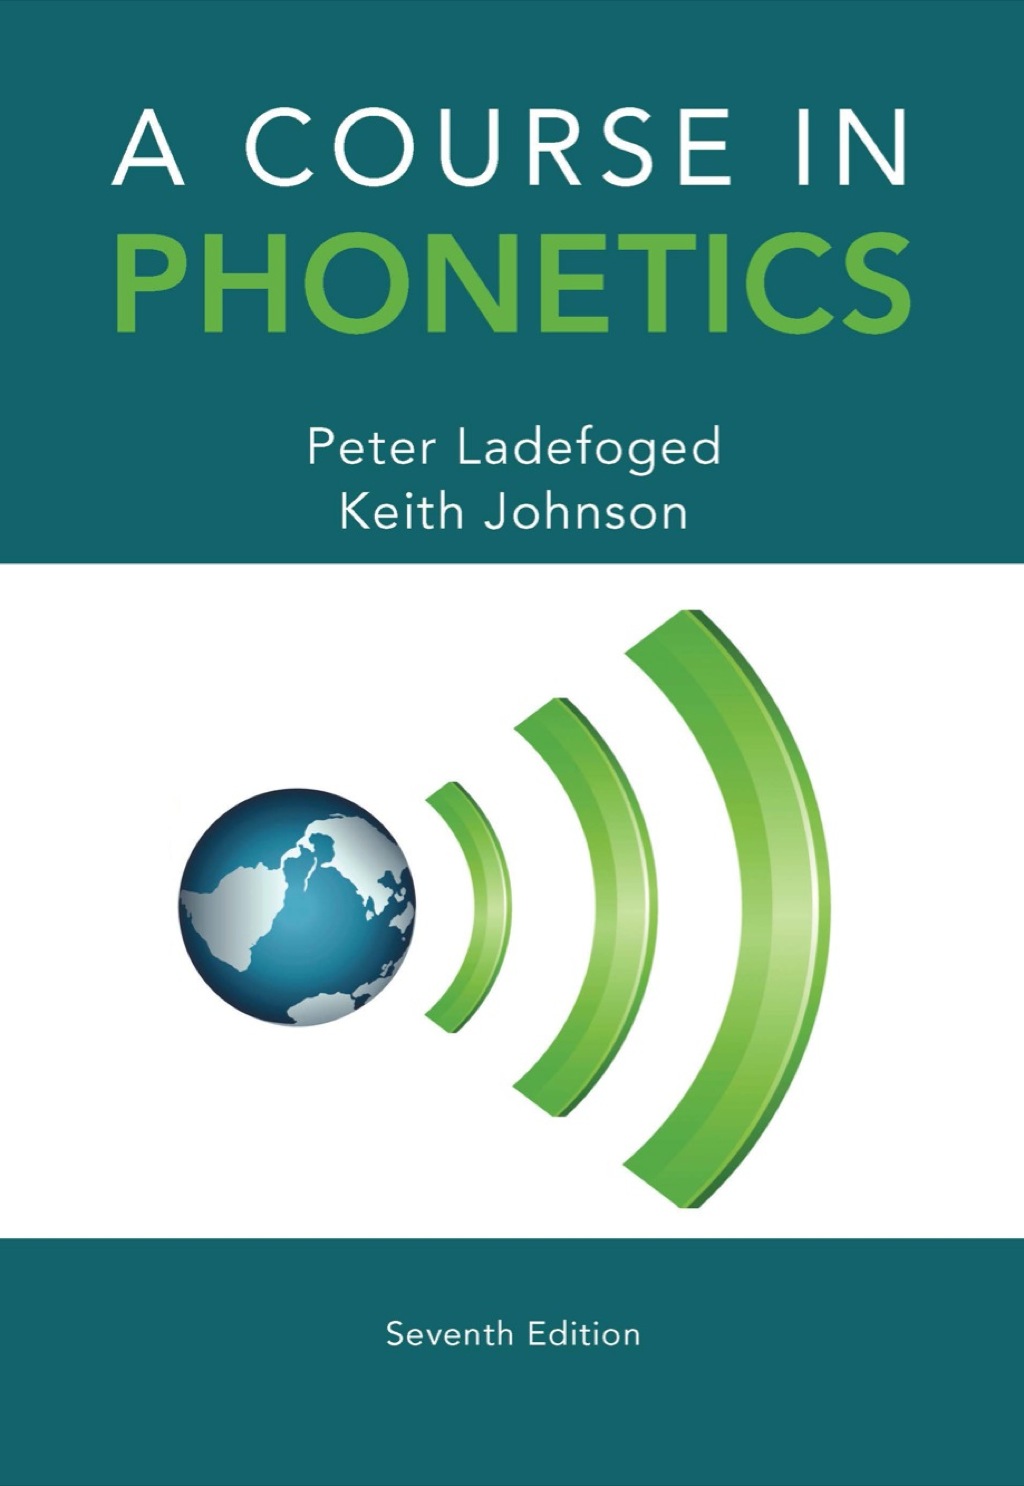 A Course in Phonetics - 7th Edition (eBook Rental)